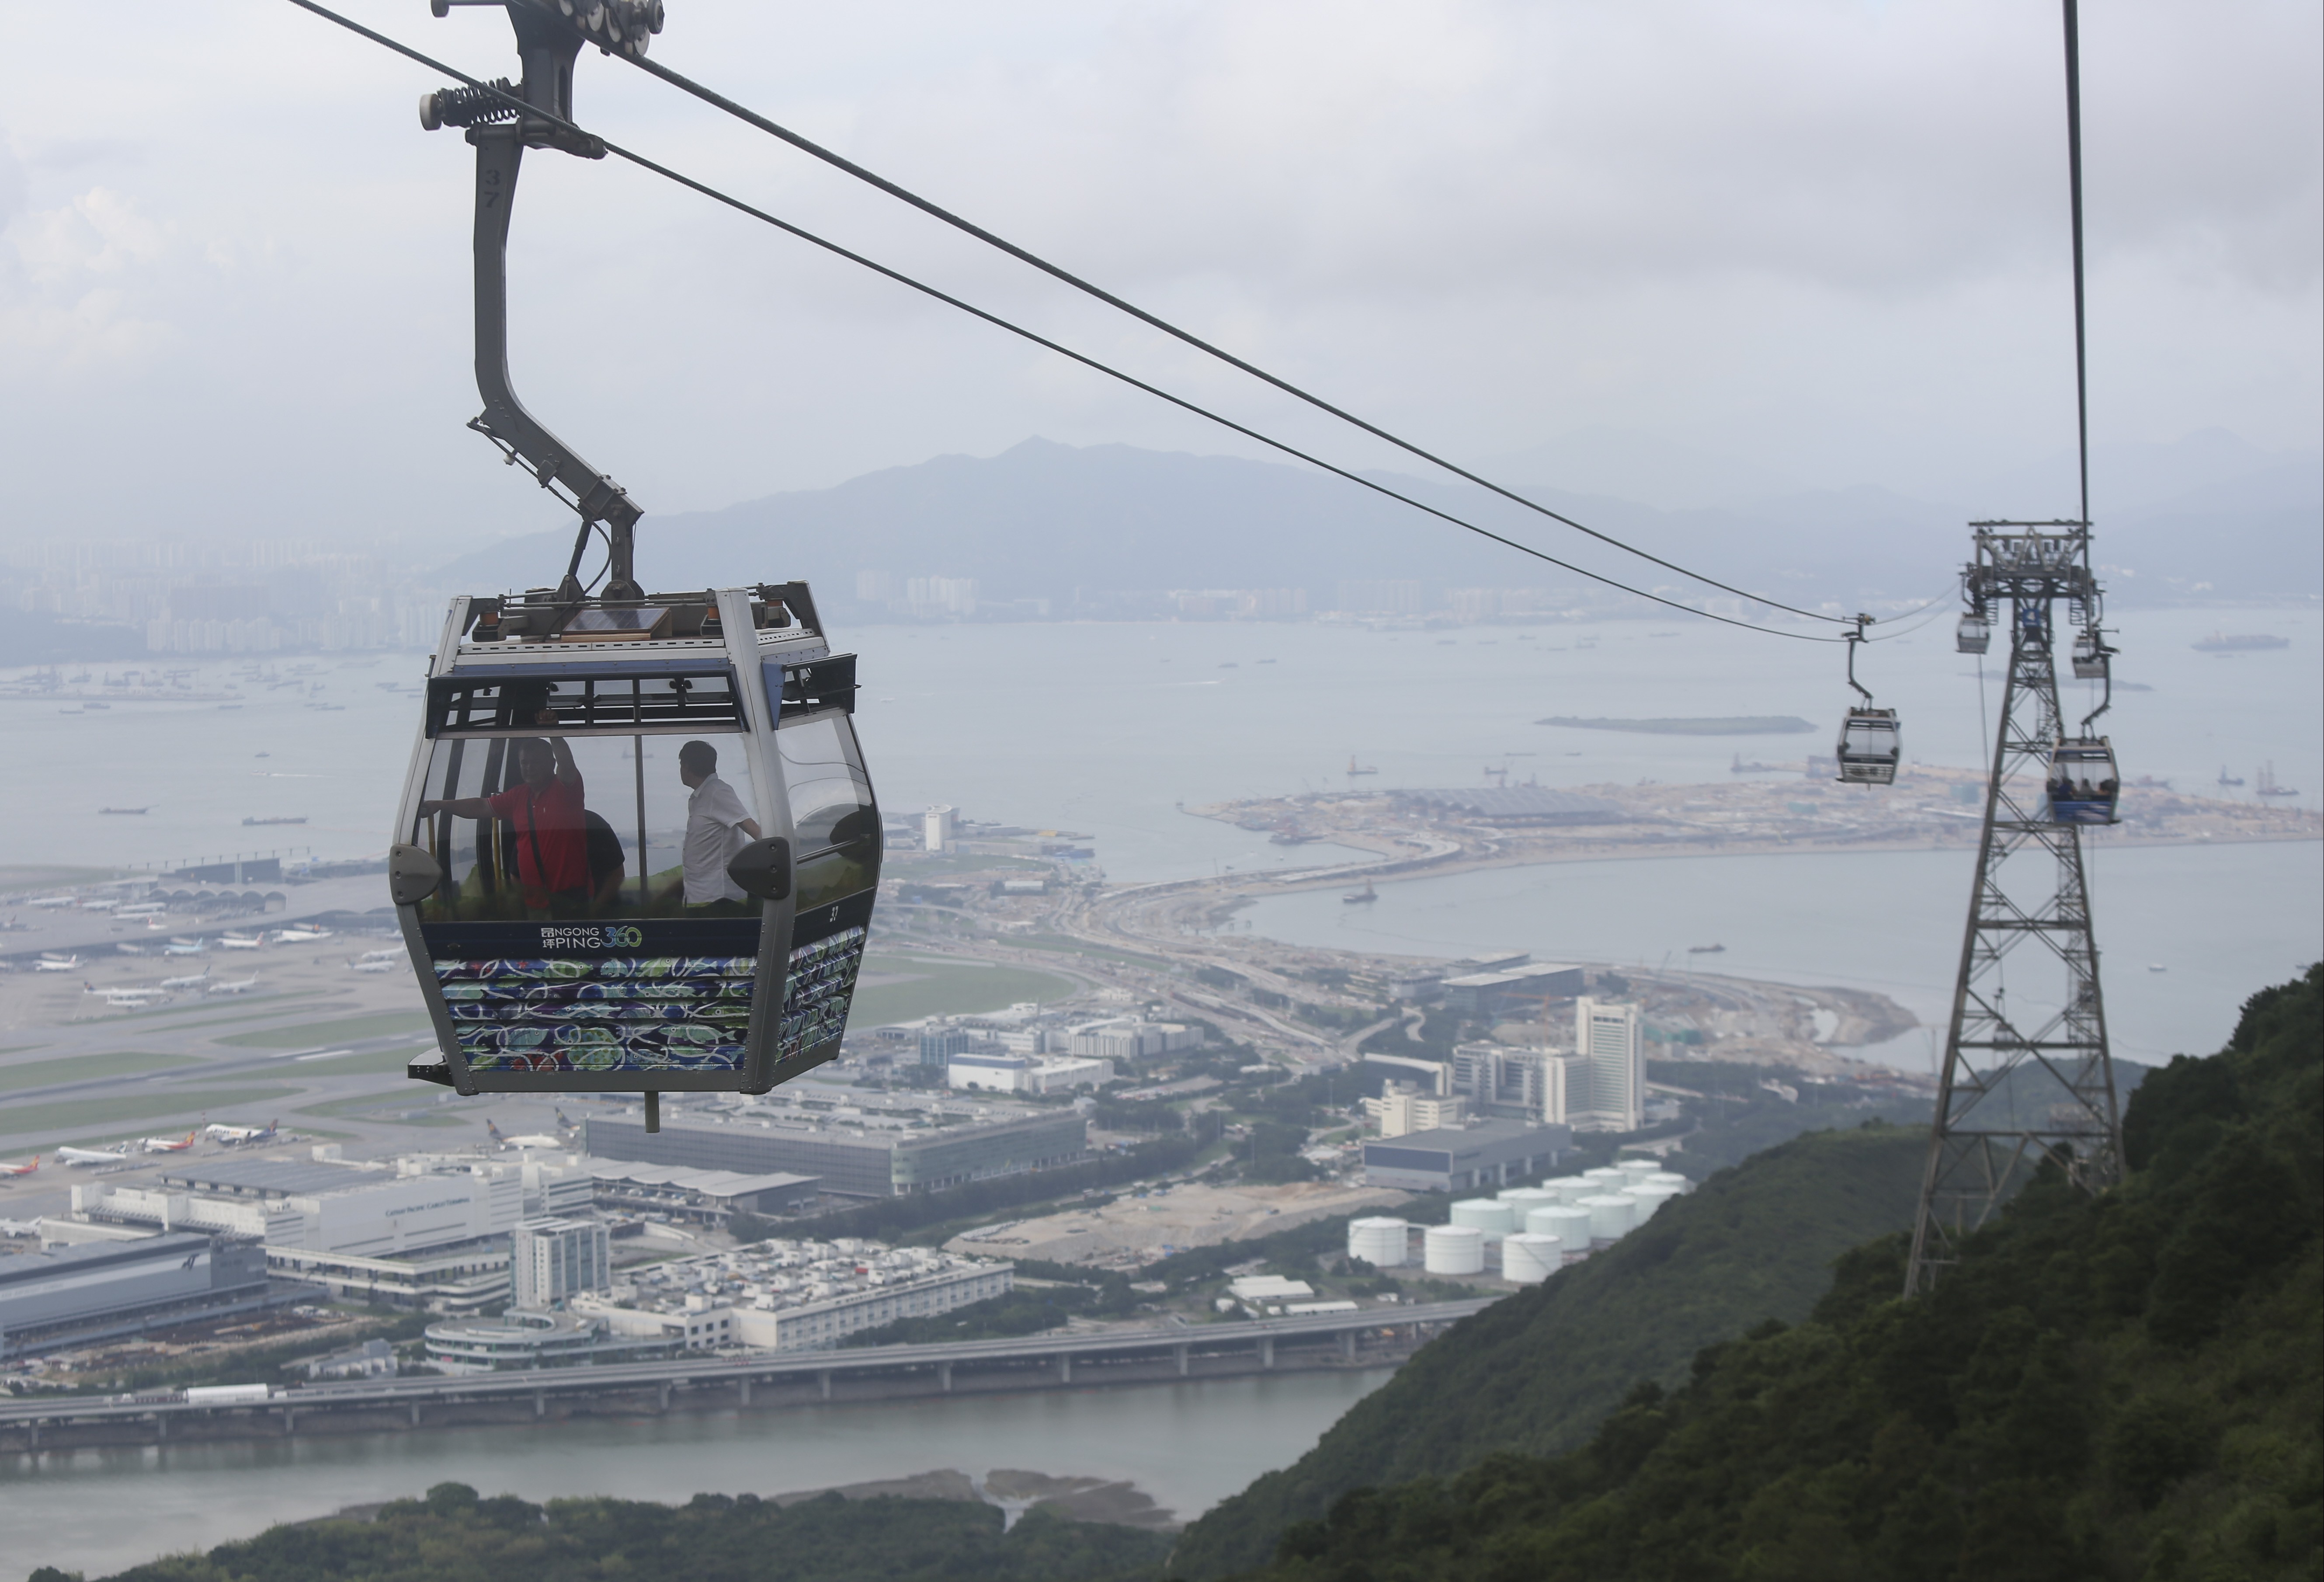 Forty cable cars now feature 20 new designs by 10 local designers and artists. Photo: Xiaomei Chen